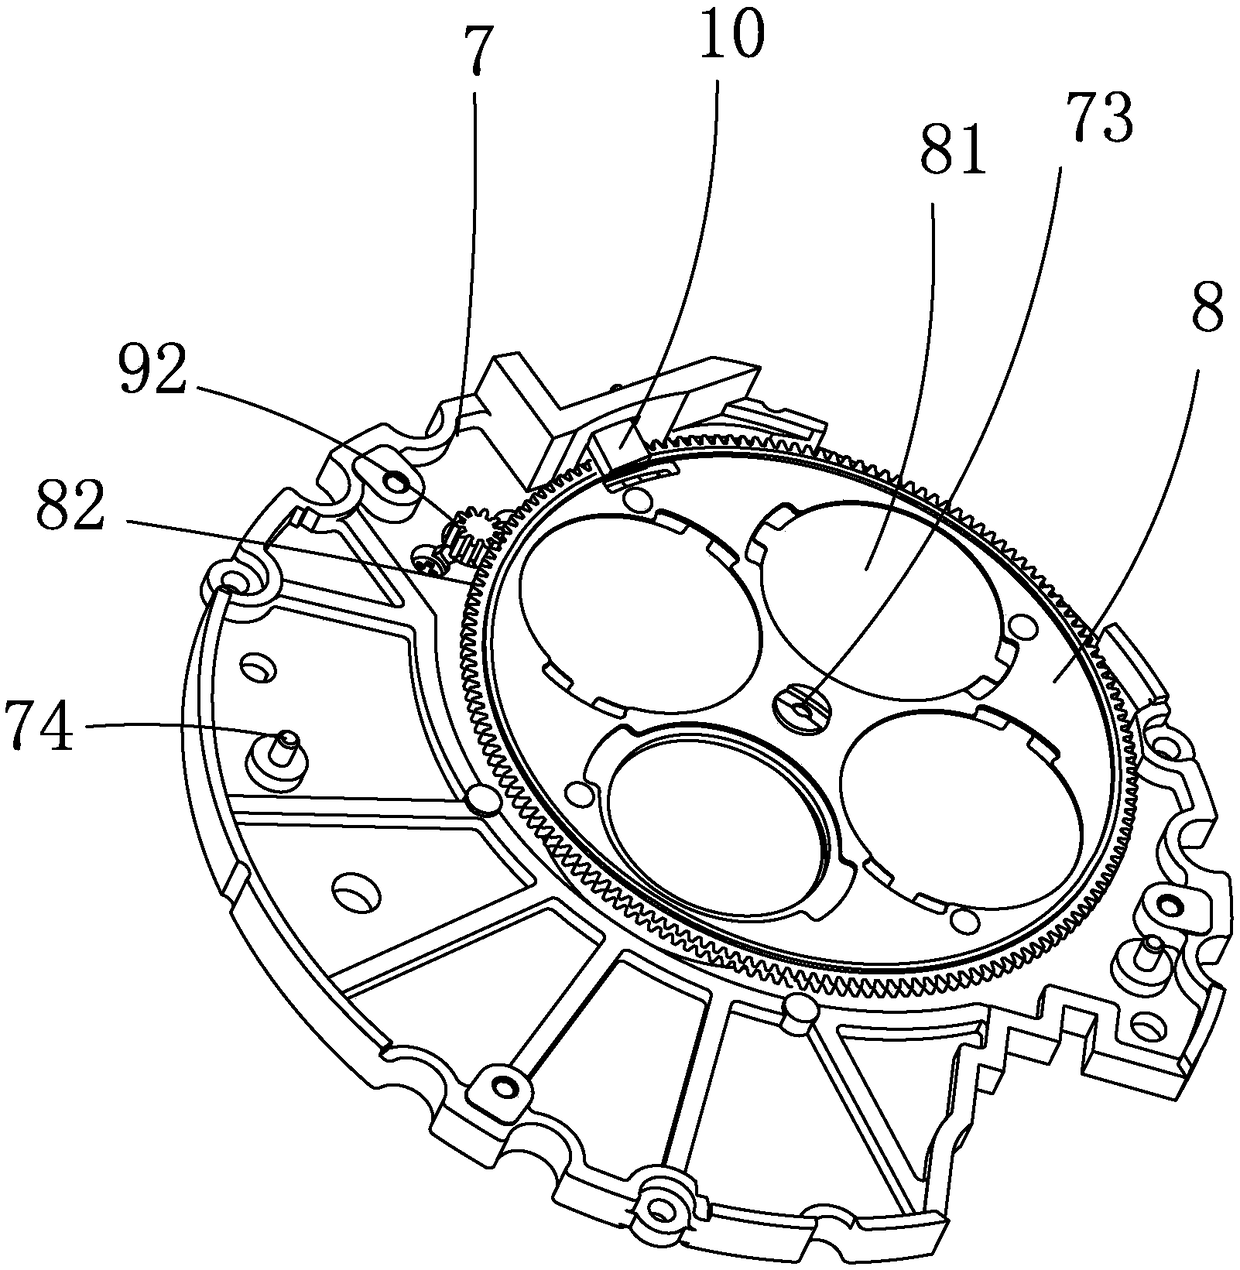 Stepping diaphragm structure provided with dimmer conversion device